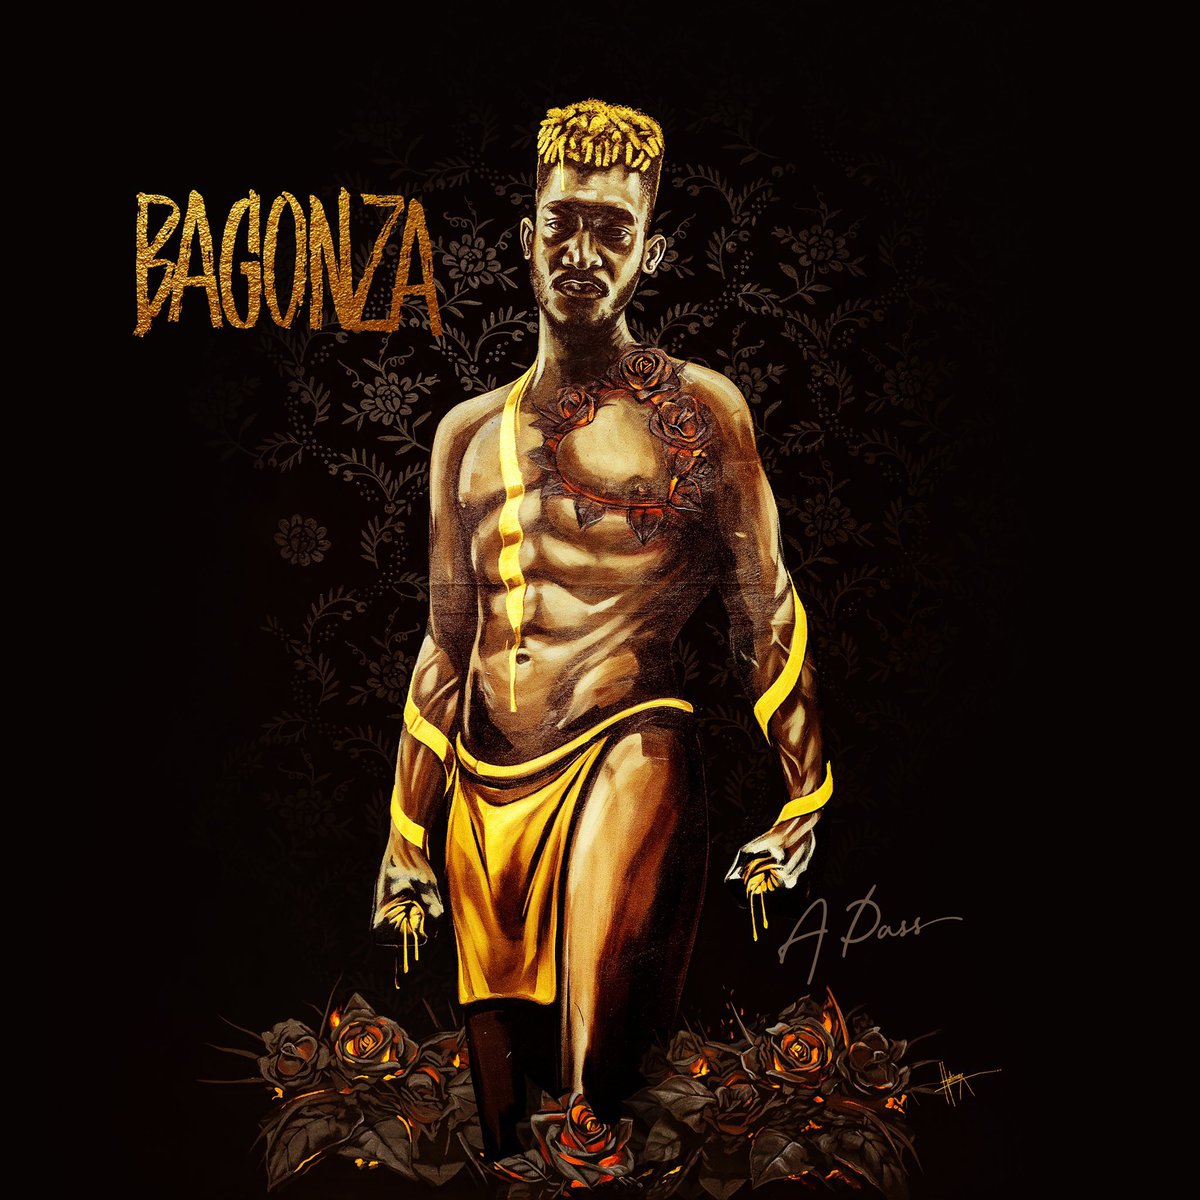 Only good music enthusiasts
Rate: Out of 10 
#BagonzaTheAlbum